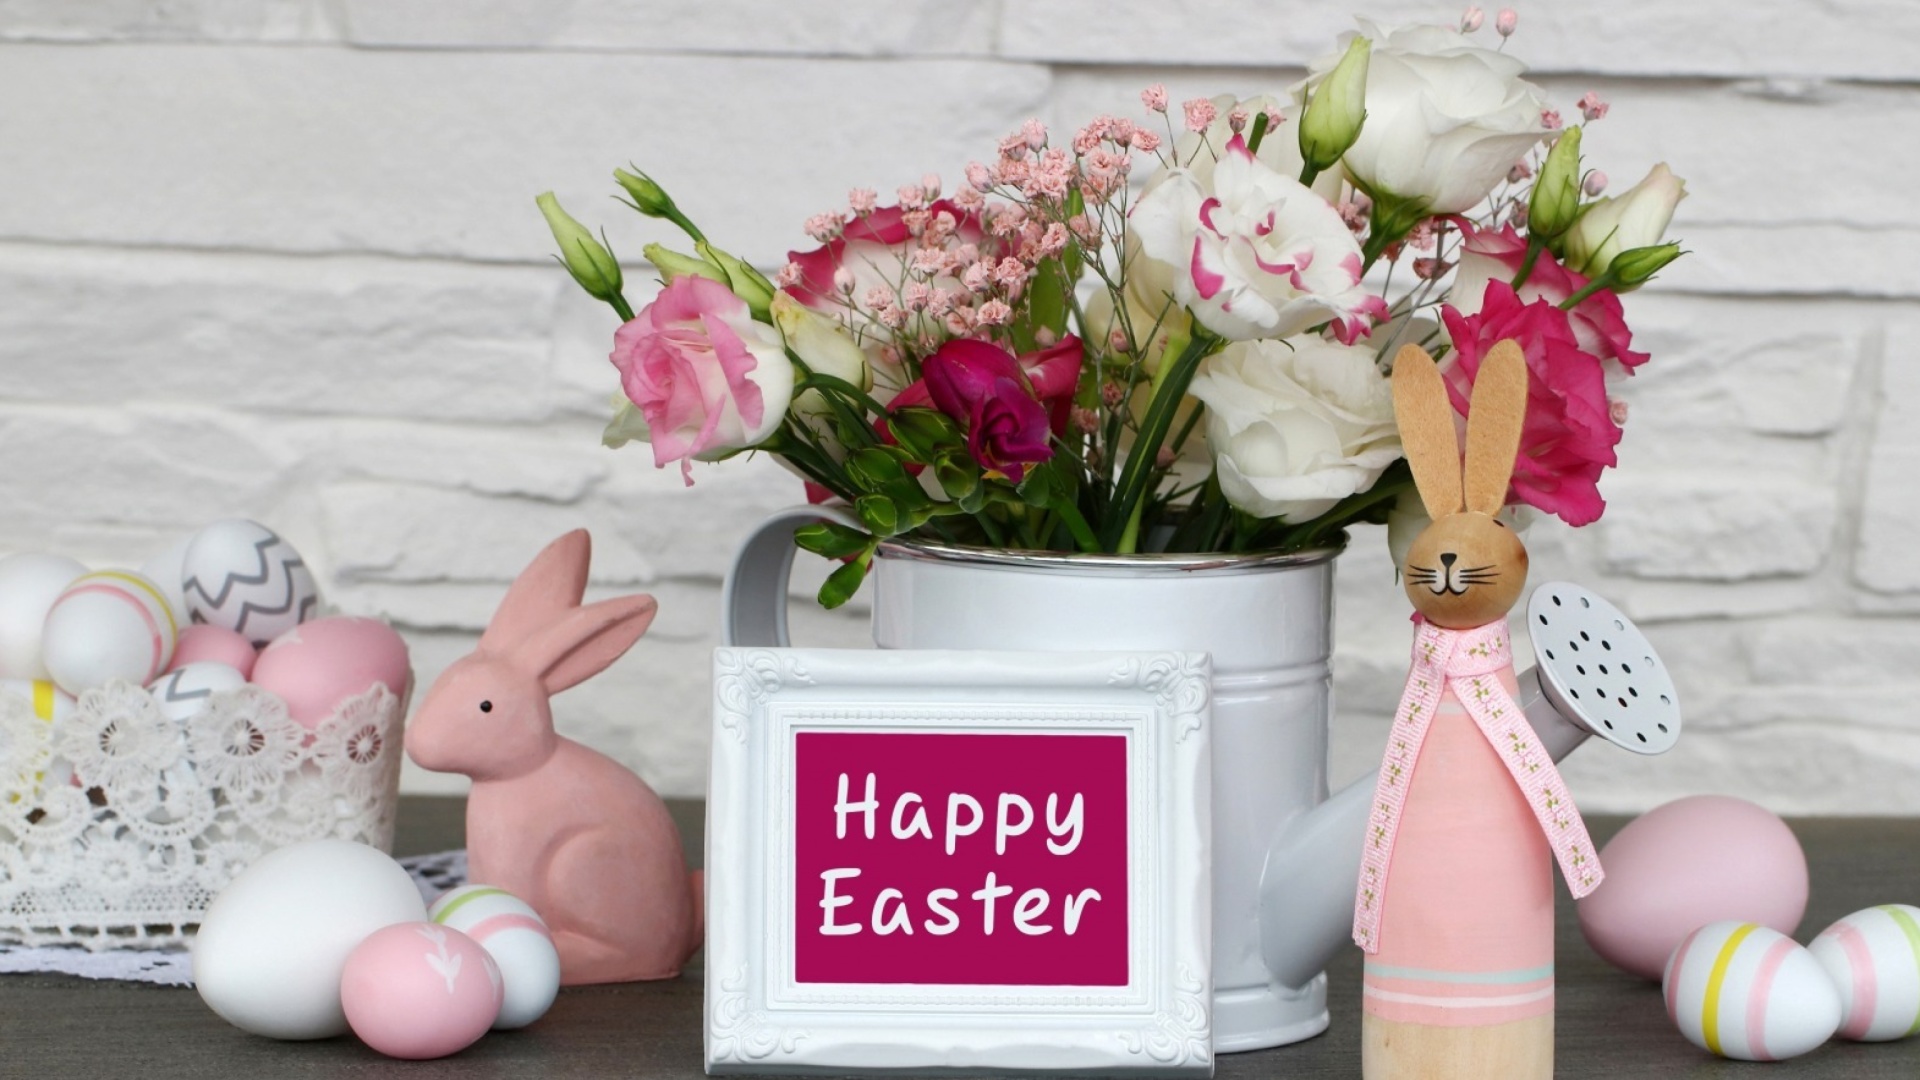 Happy Easter with Hare Figures wallpaper 1920x1080